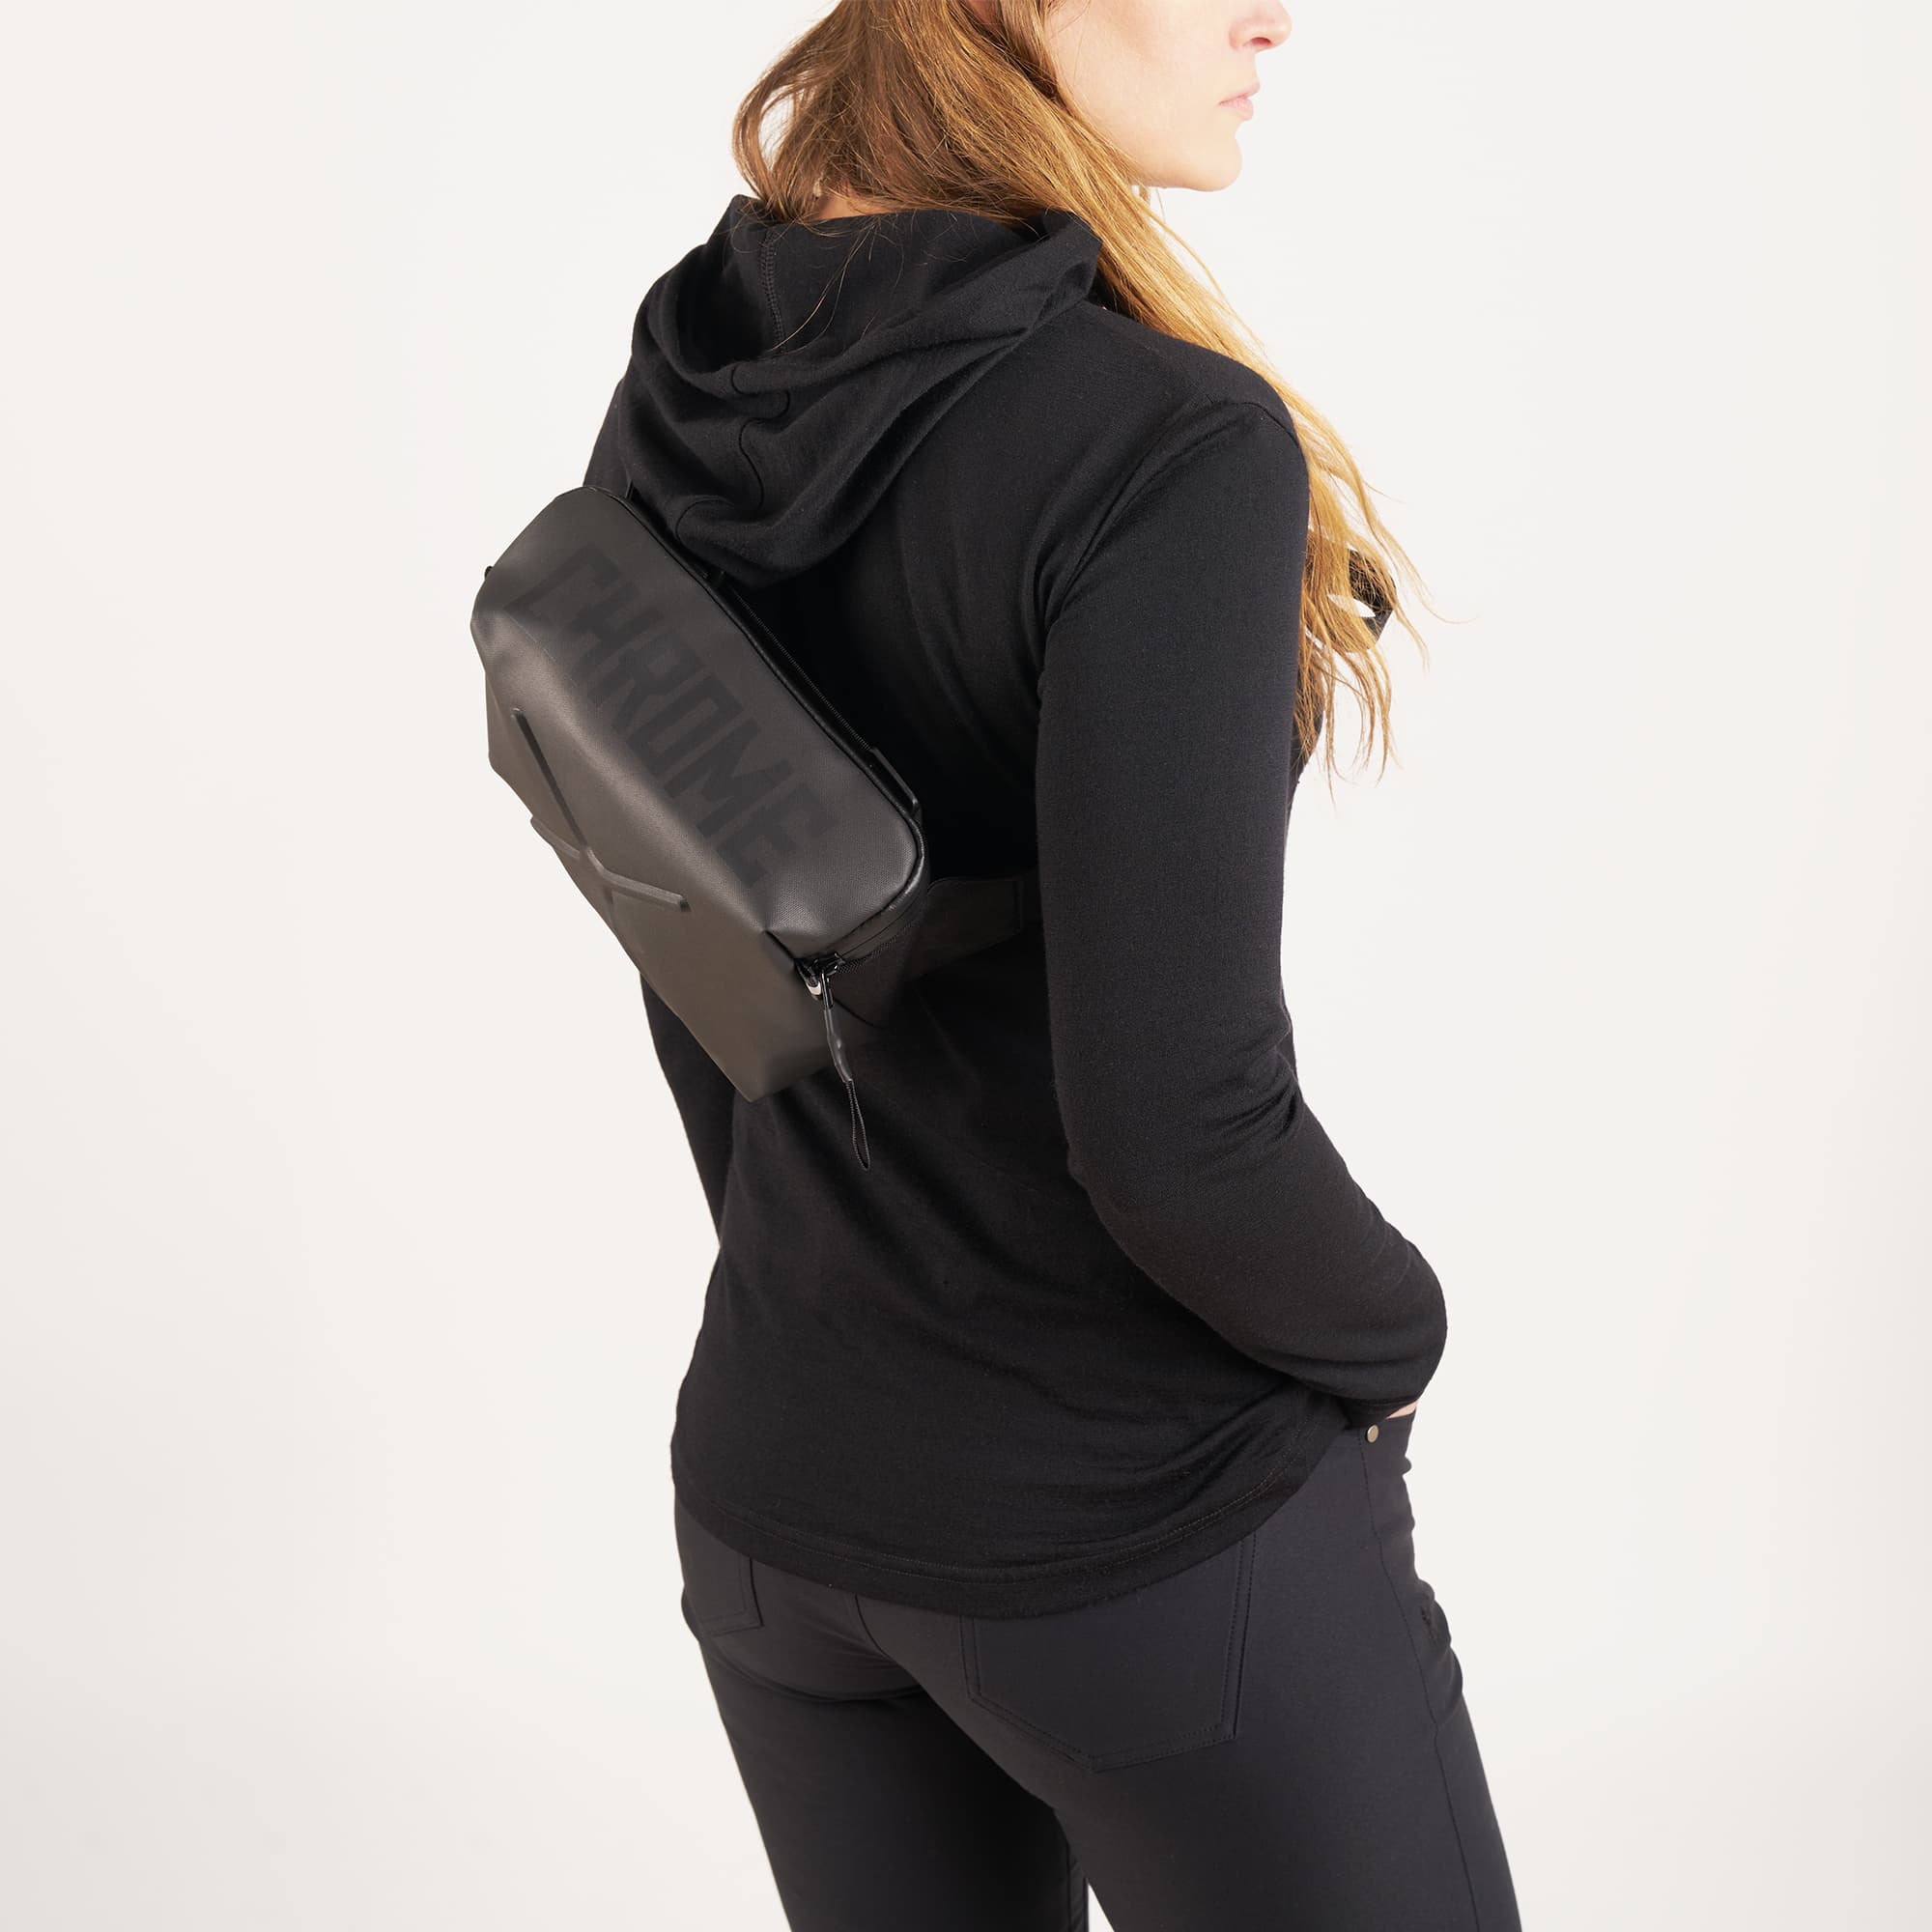 Helix Handlebar bag in black worn as a sling by a woman